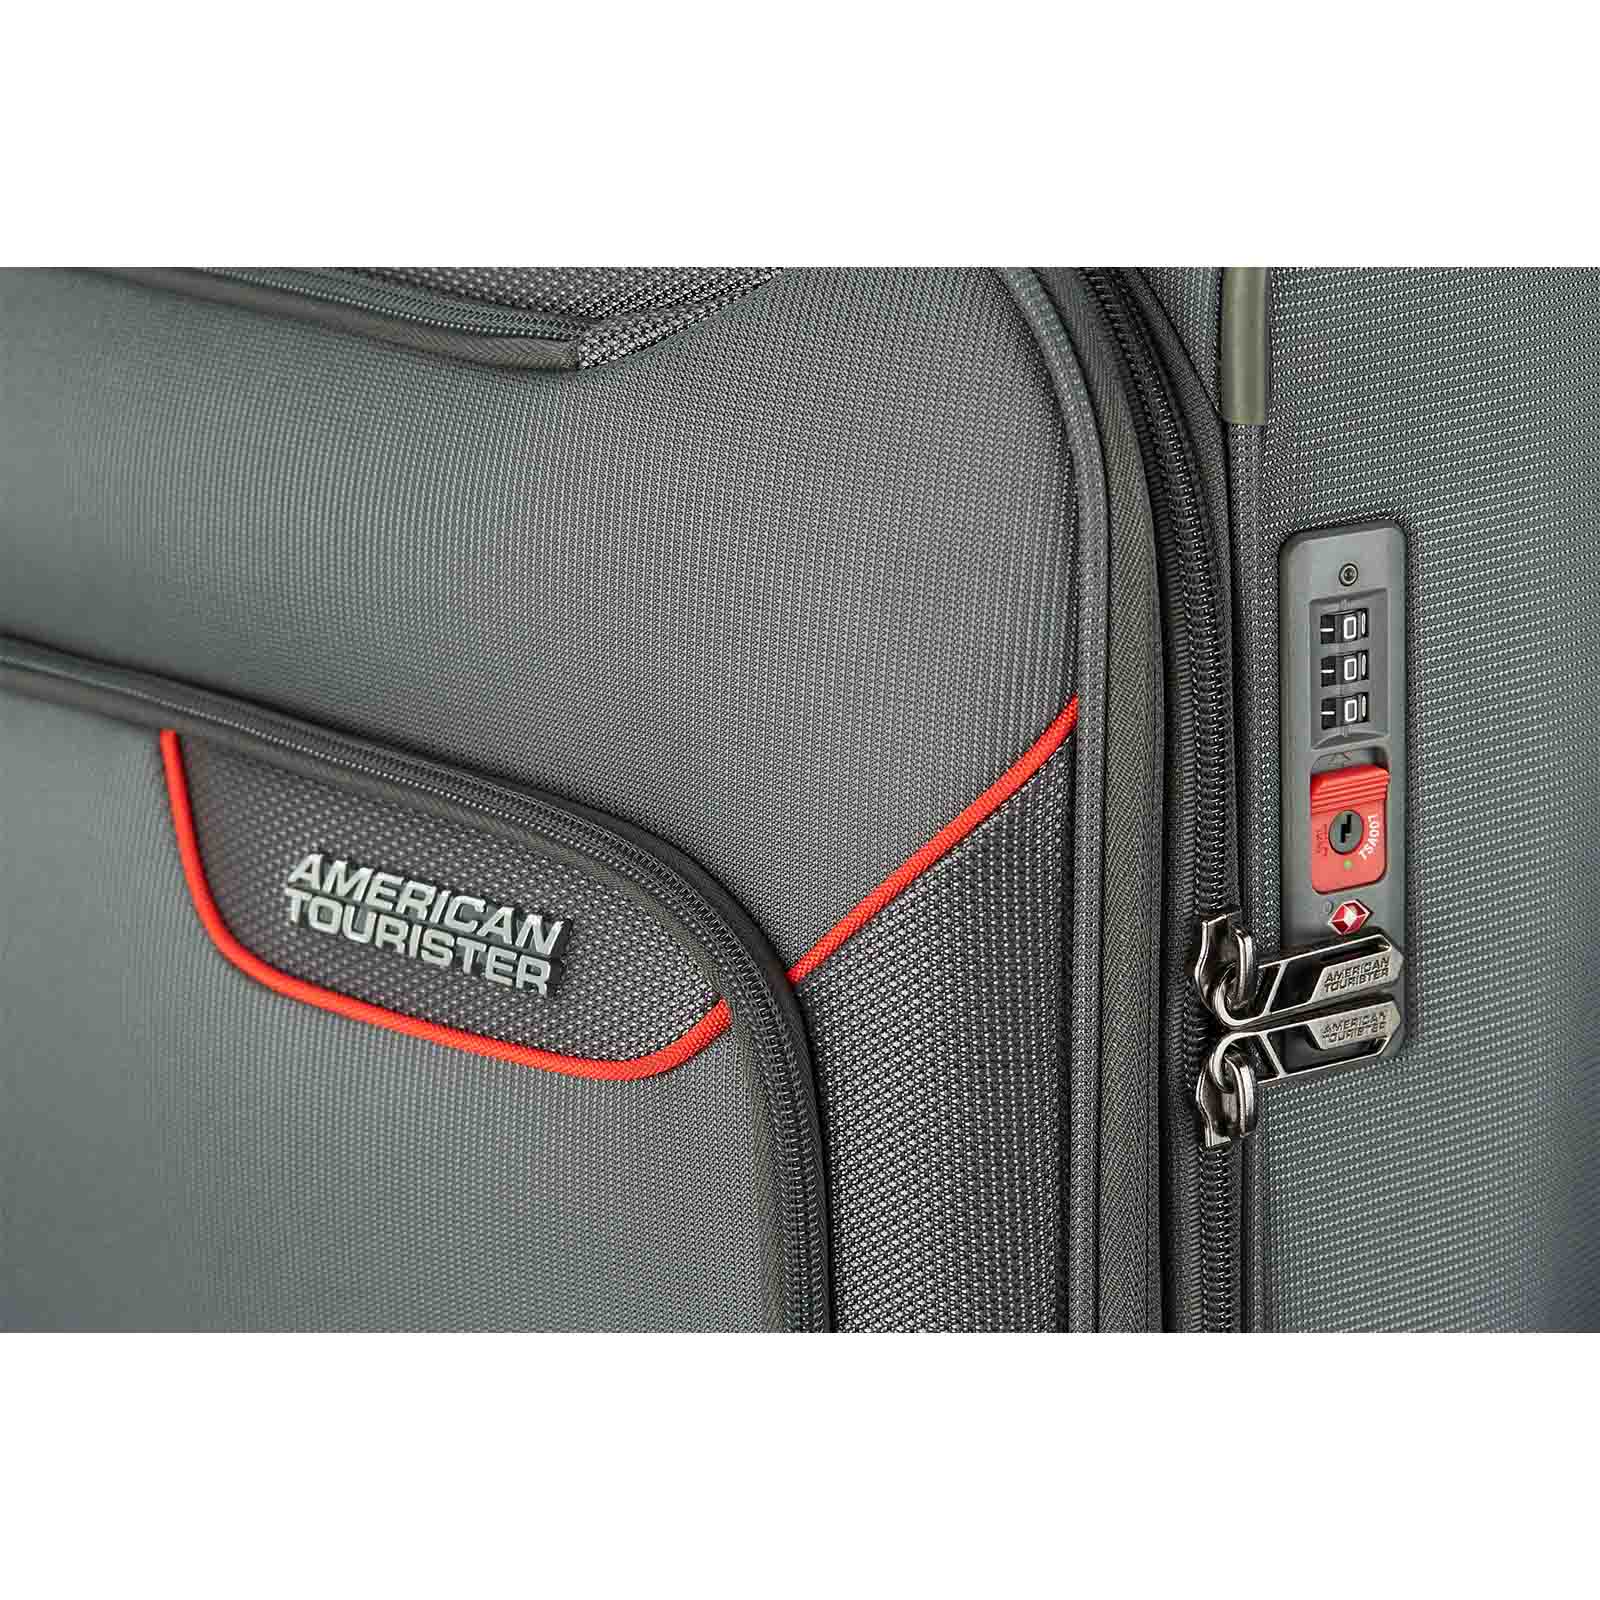 American-Tourister-Applite-4-Eco-82cm-Suitcase-Grey-Red-Lock